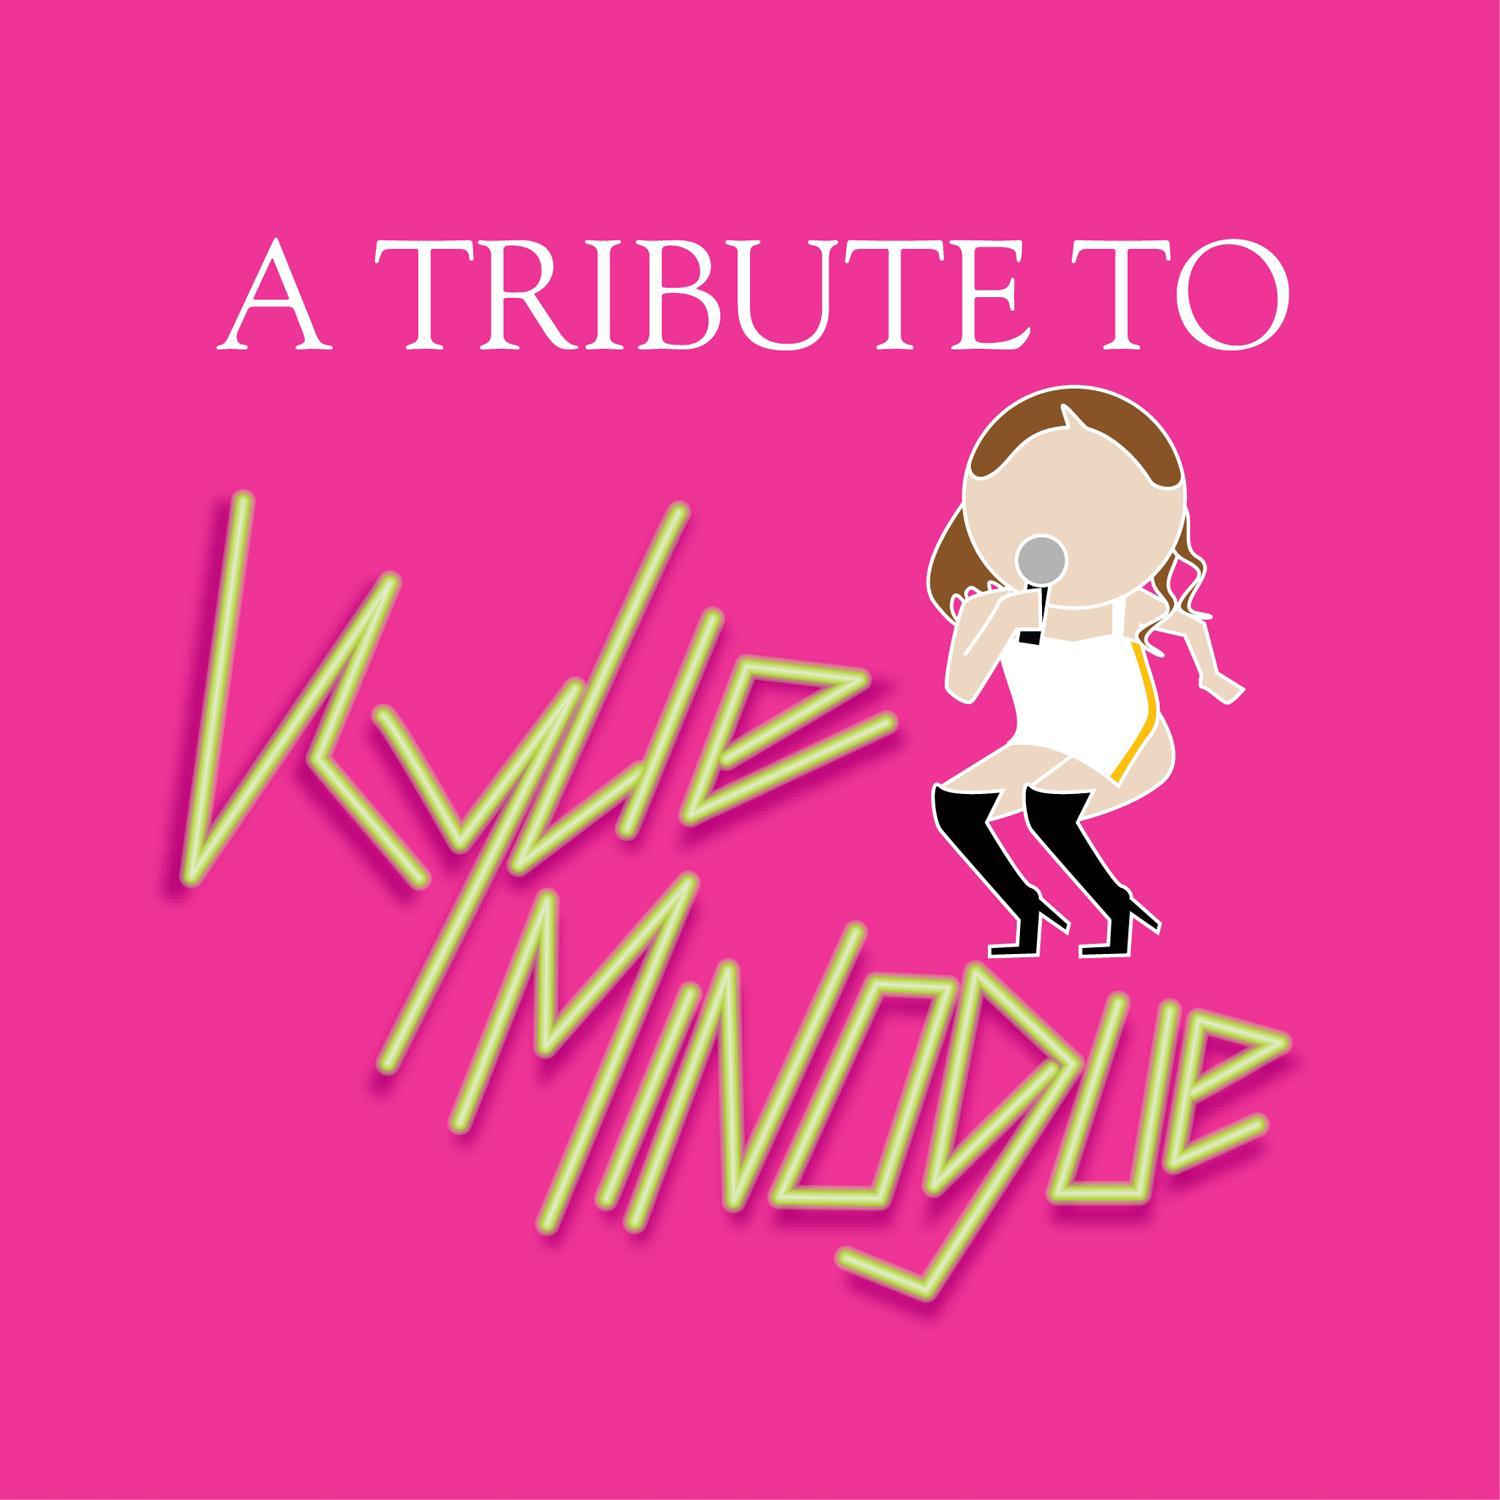 A Tribute To Kylie Minogue